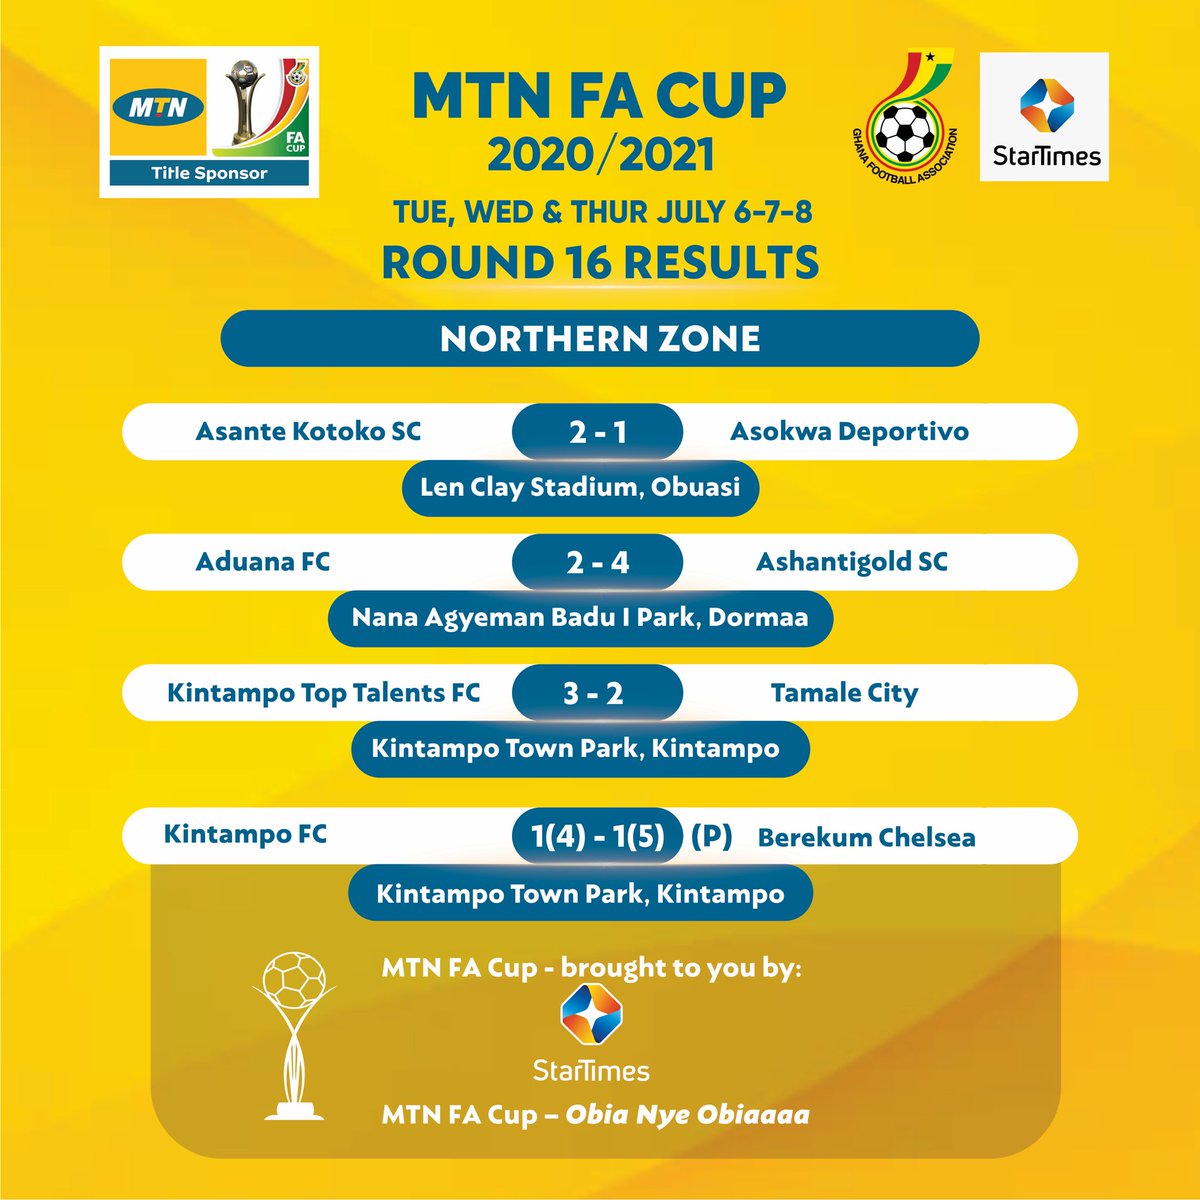 MTN FA CUP on X